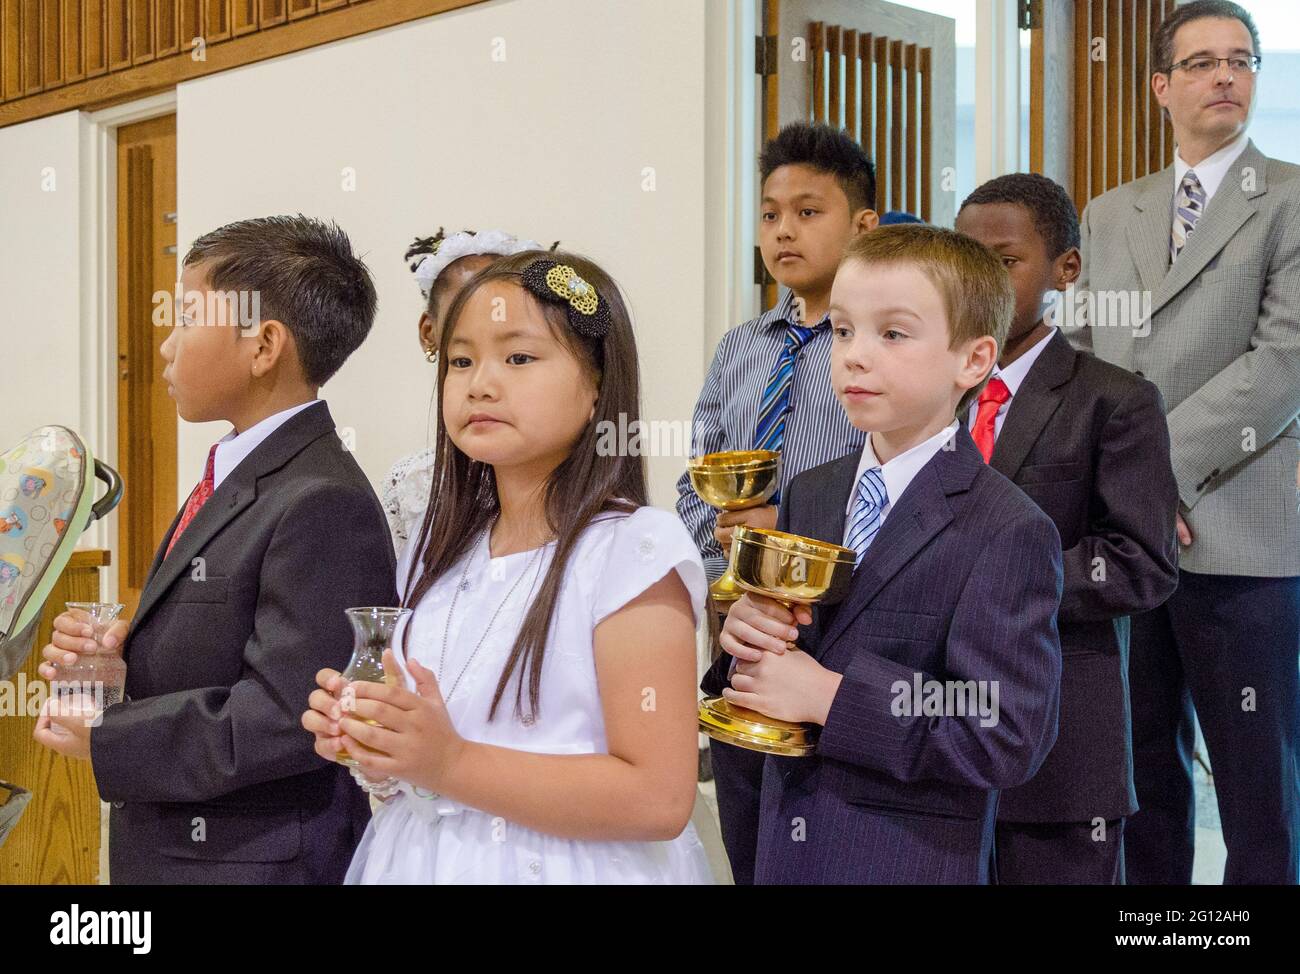 Children in processional at Catholic church.  Four boys and a girl in their Sunday best walk down the aisle to receive communion, while an adult man s Stock Photo